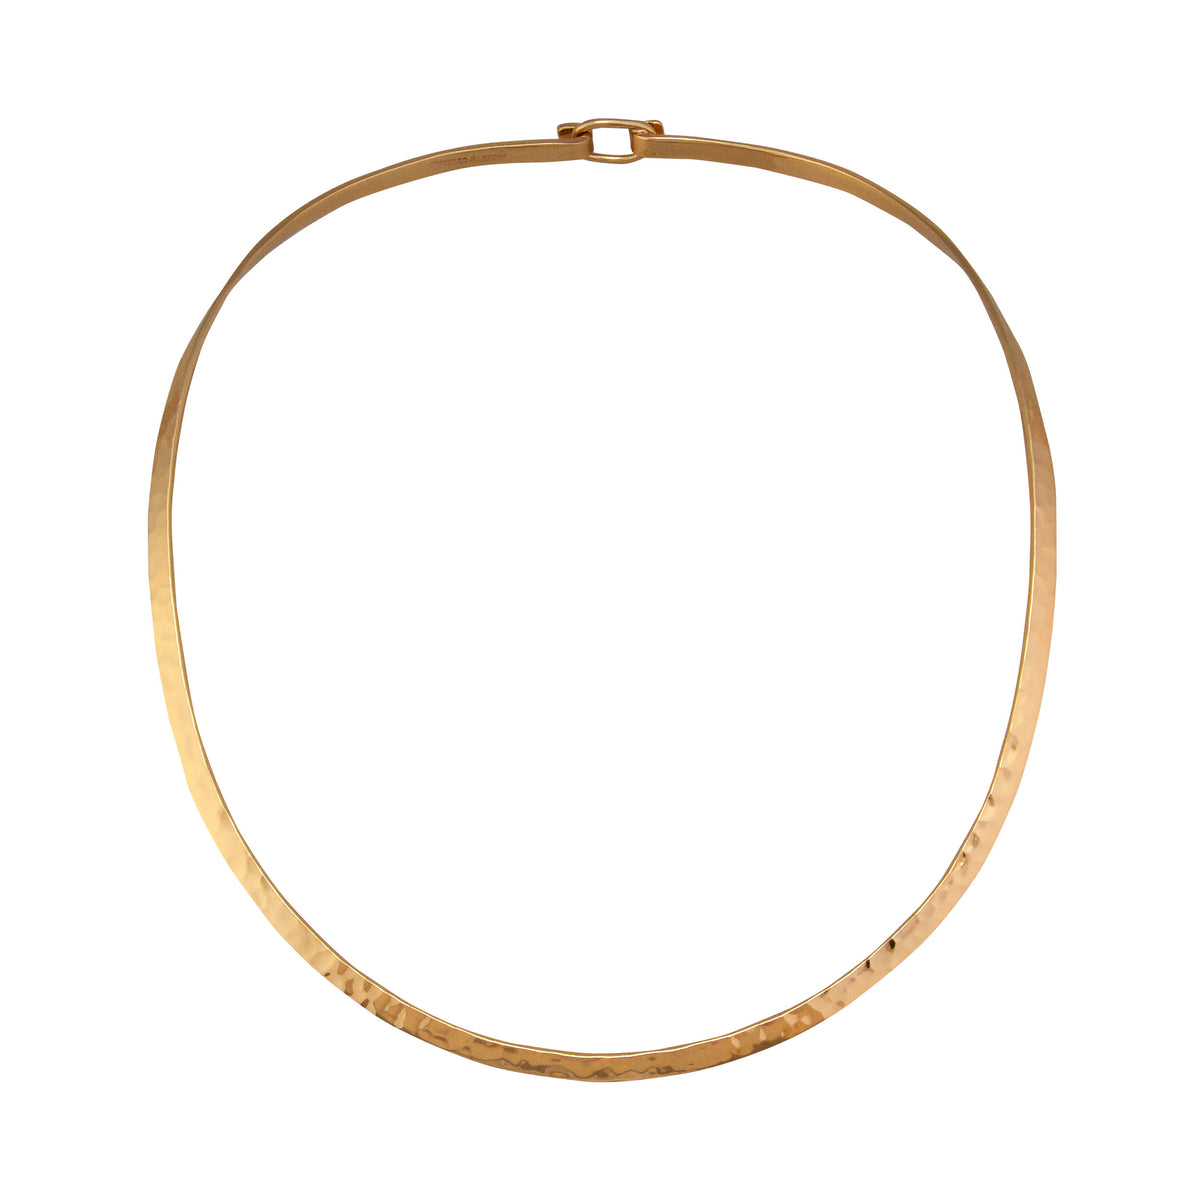 Alchemia Round Hammered Neckwire with Clasp | Charles Albert Jewelry